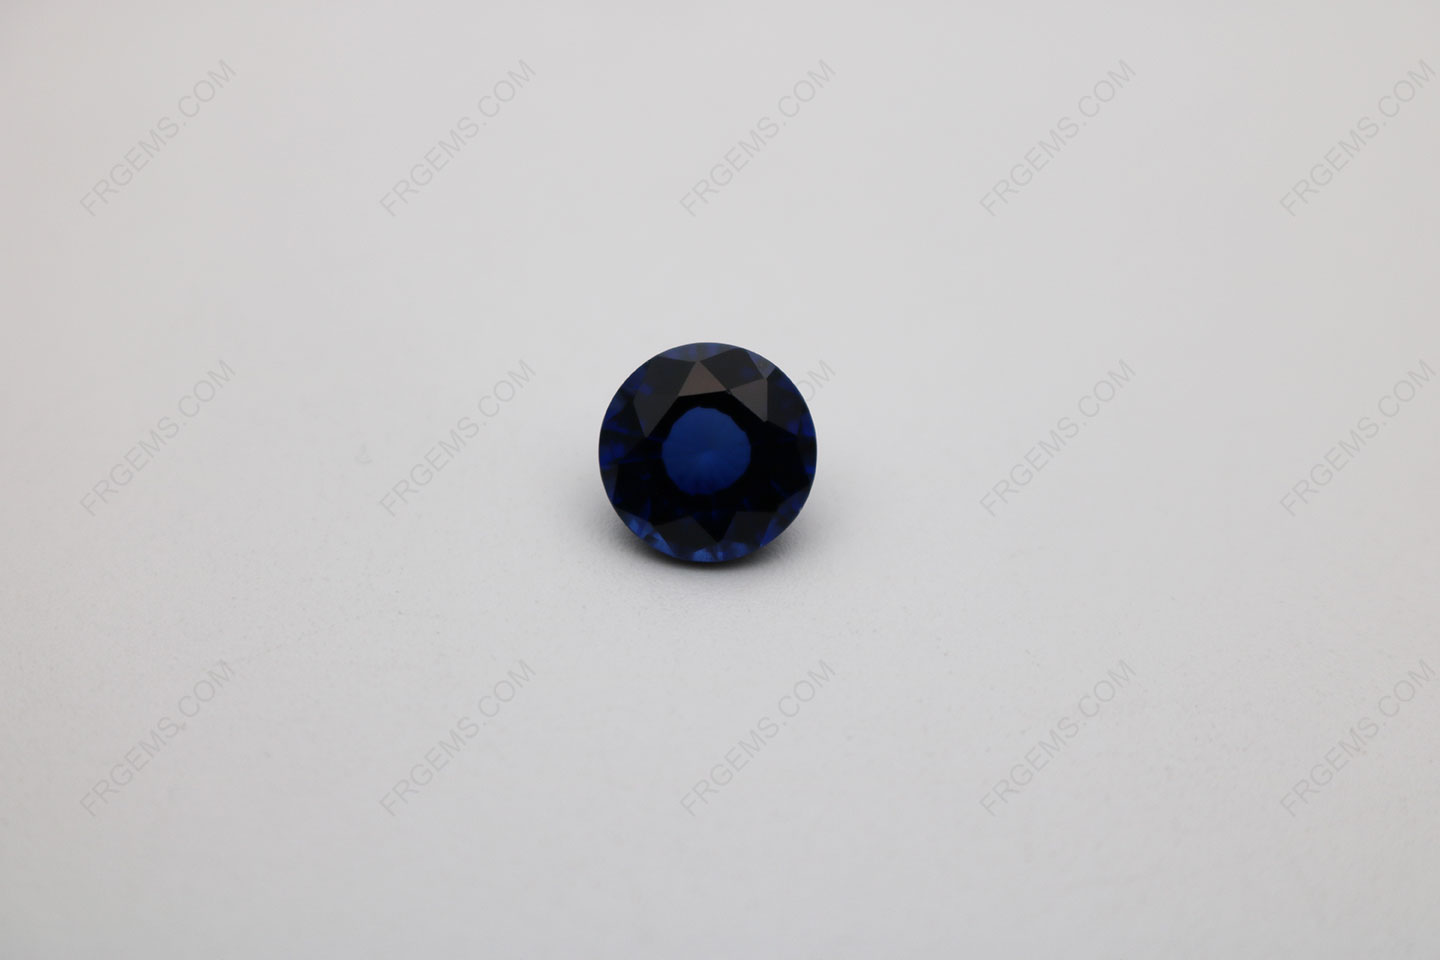 Loose Synthetic Corundum Blue Sapphire 34# Round Shape step cut Thailand cutting 8mm stones Supplier china